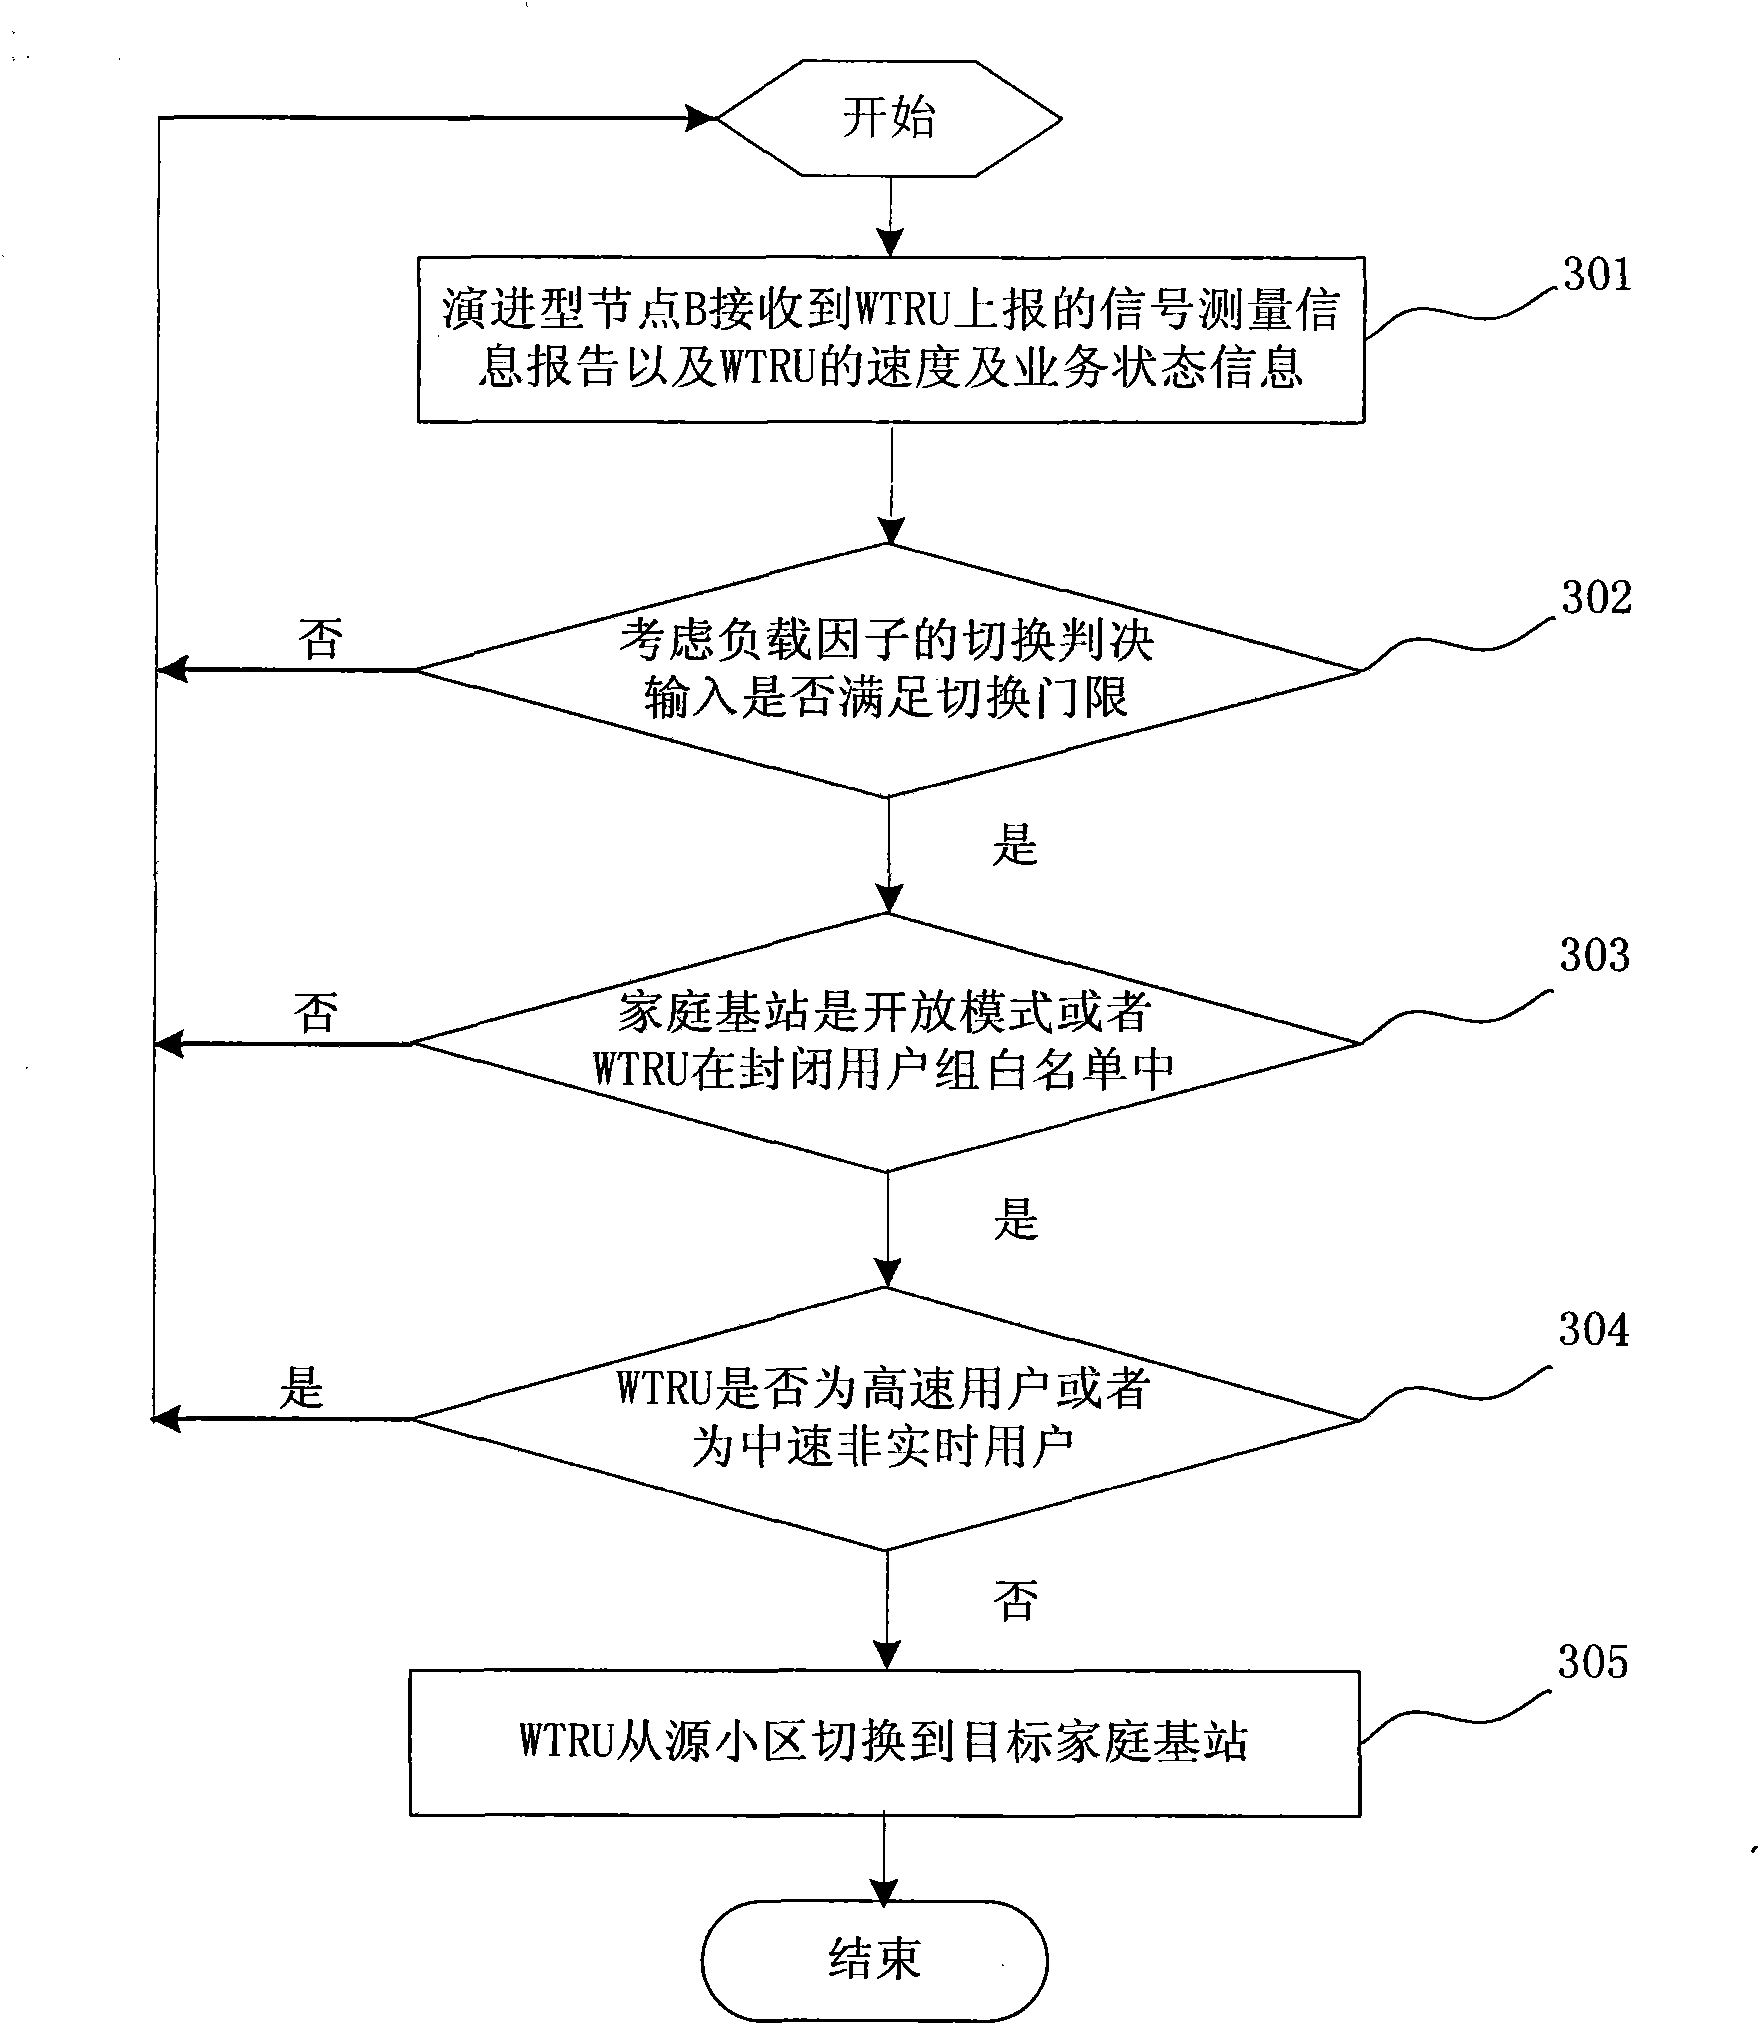 Switching optimization method between macro cell and family base station cell